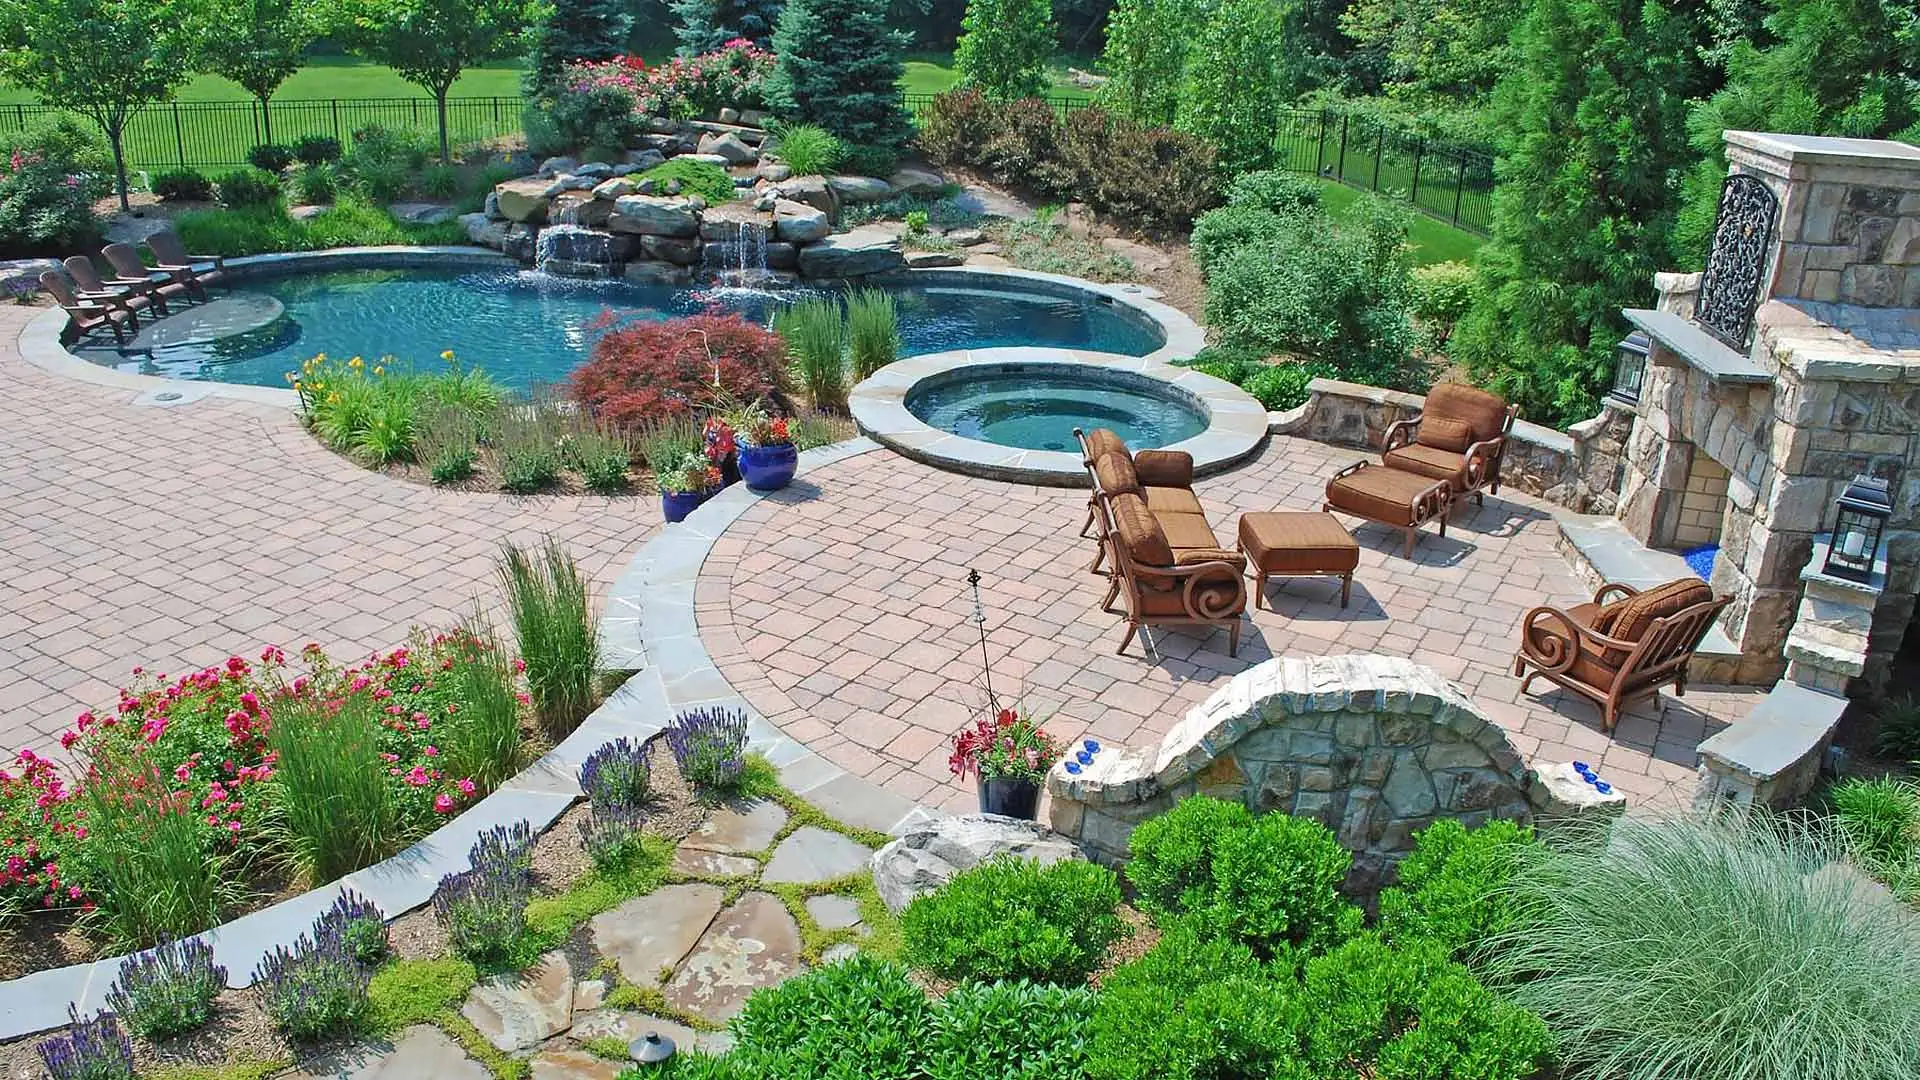 Poolside outdoor living area designed for a Chester Springs, Pennsylvania home.